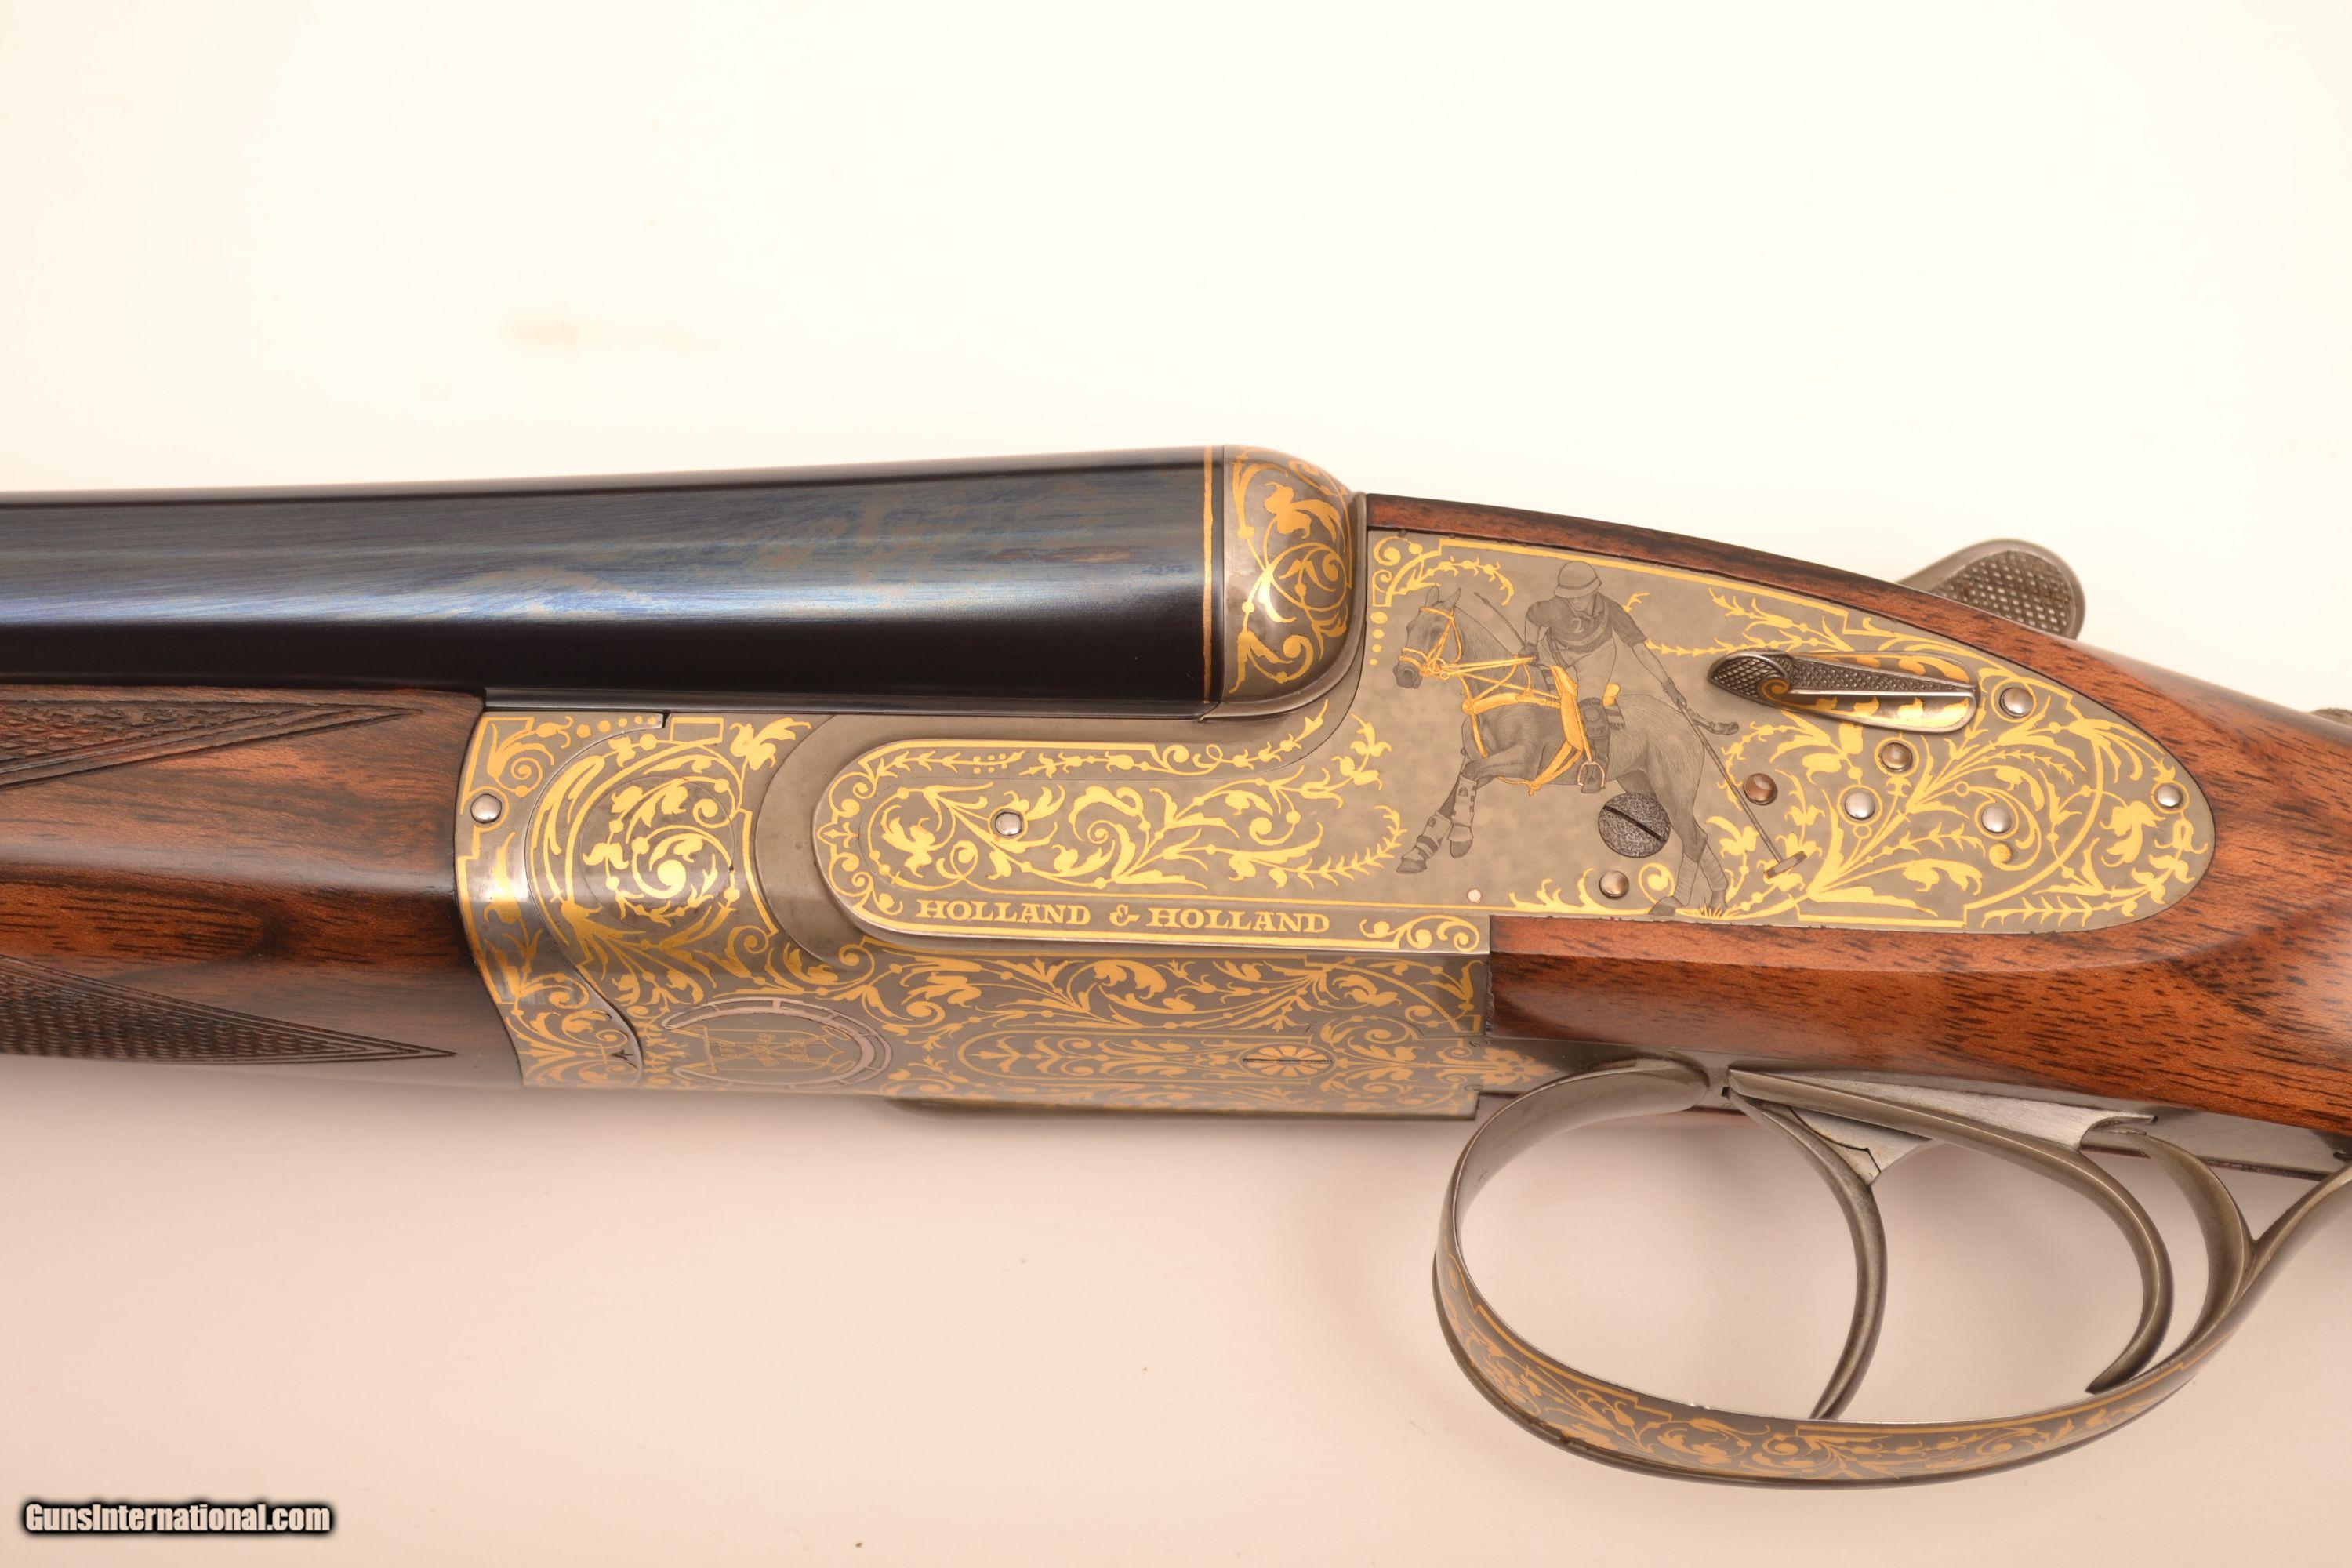 Holland and holland rifle serial numbers and dates